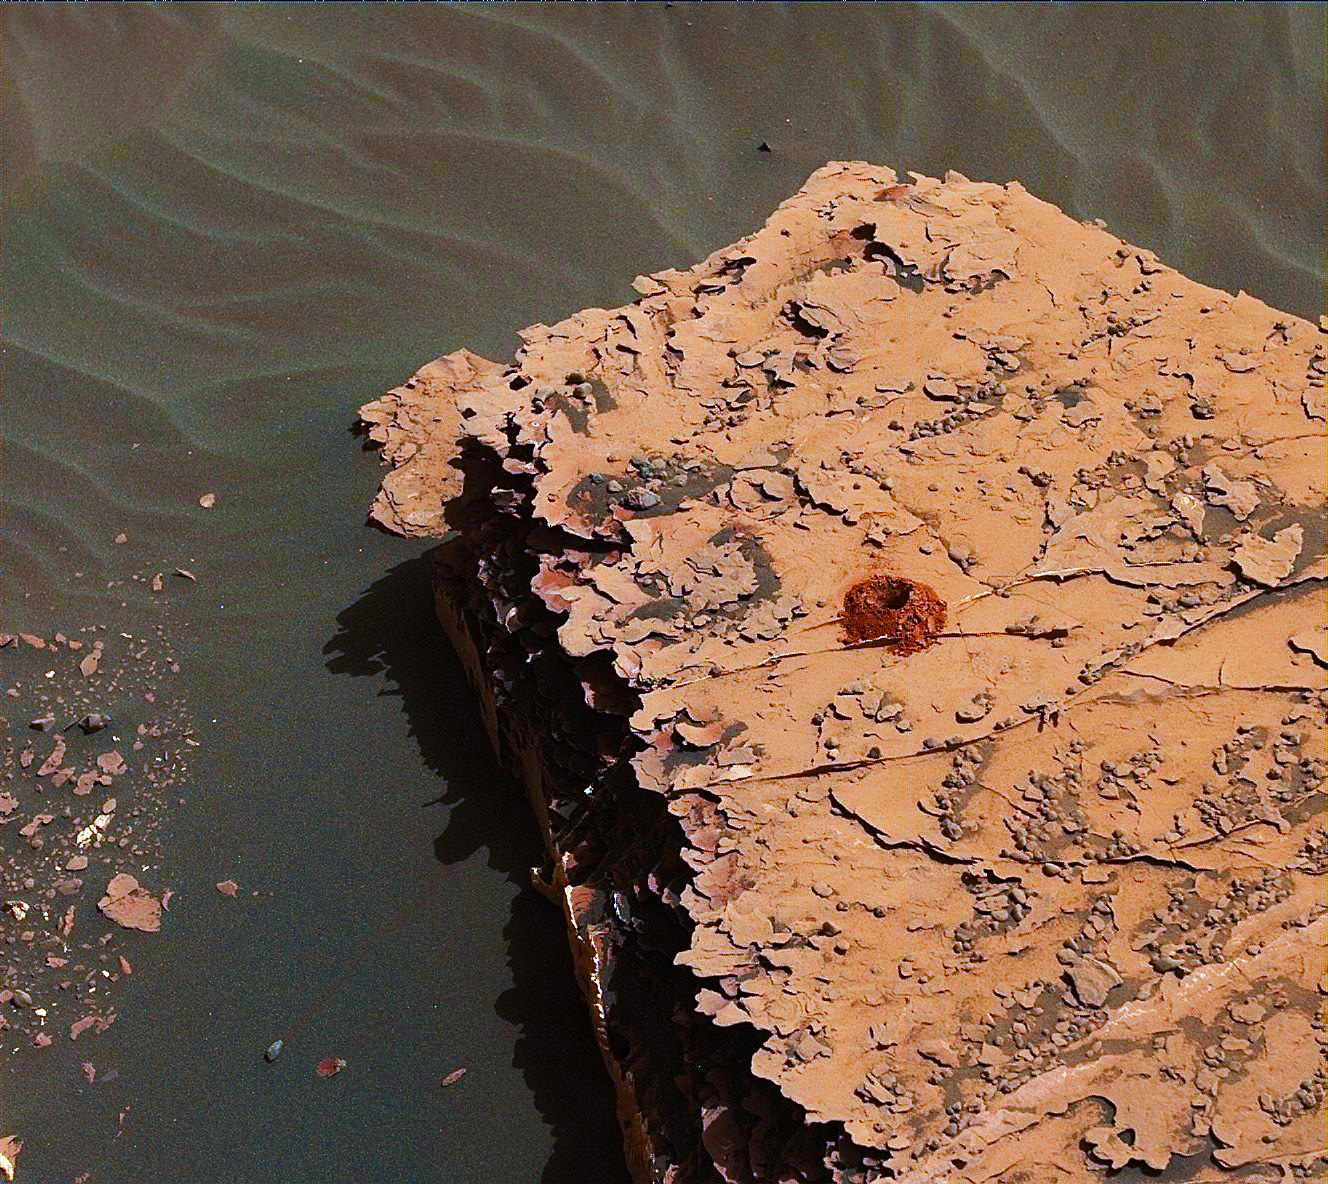 A small hole on Mars represent a big achievement for Curiosity’s engineers.